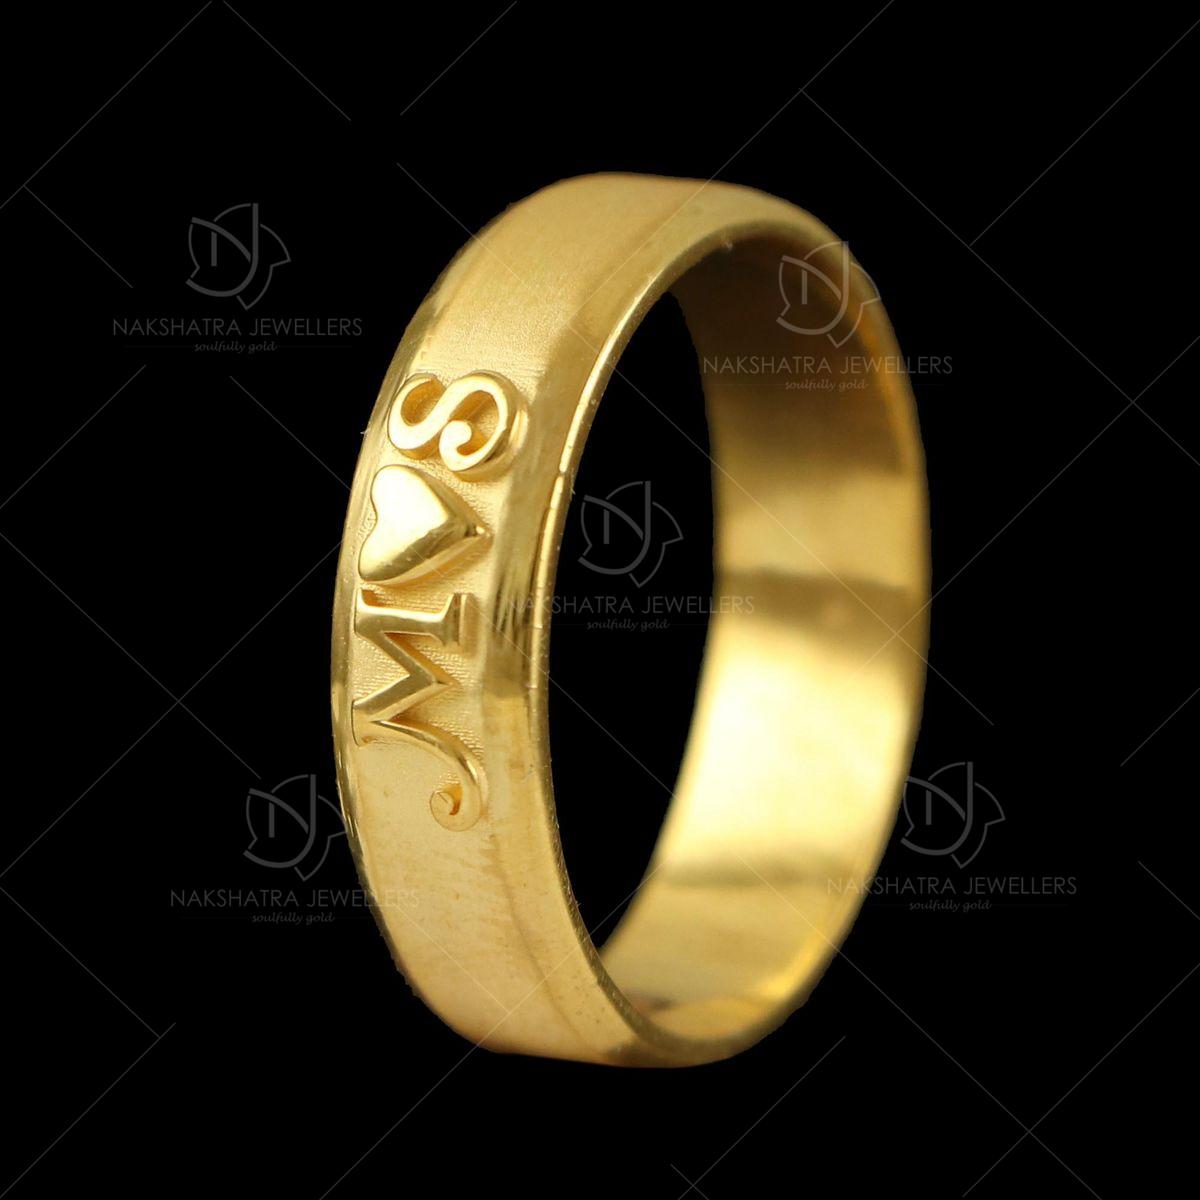 Personalized Name Ring in Real 10K Gold with Heart Tail Design | eBay